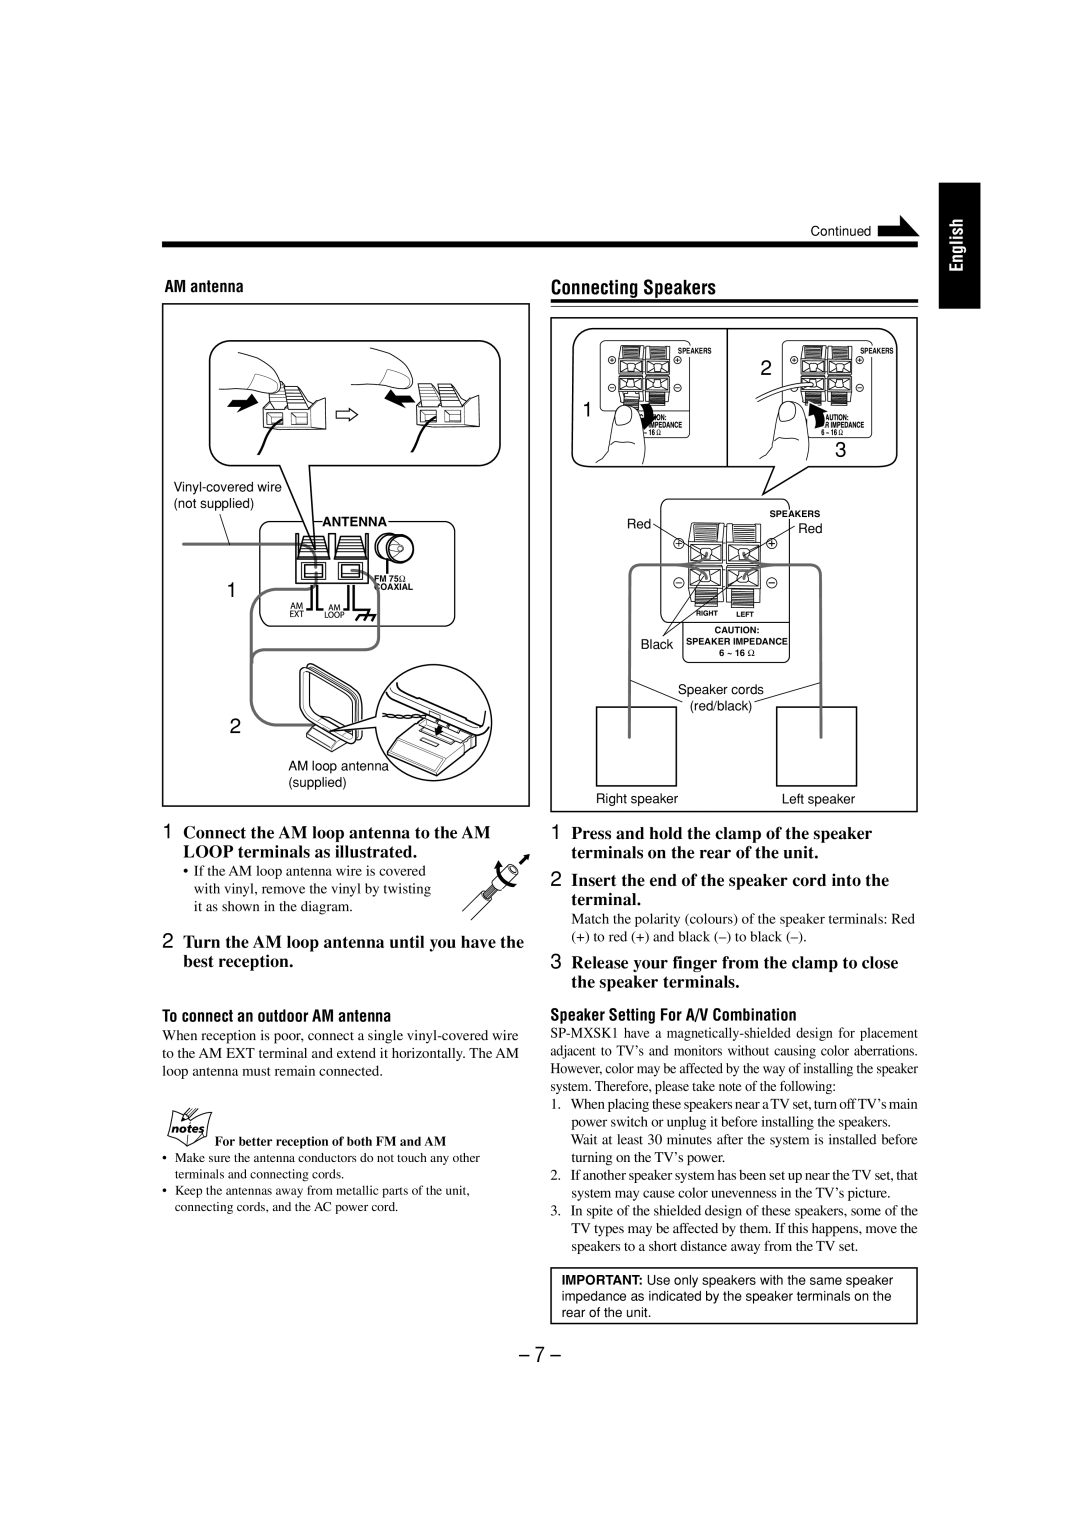 JVC CA-MXSK1 manual 7, Connecting Speakers, English, 1Connect the AM loop antenna to the AM, LOOP terminals as illustrated 